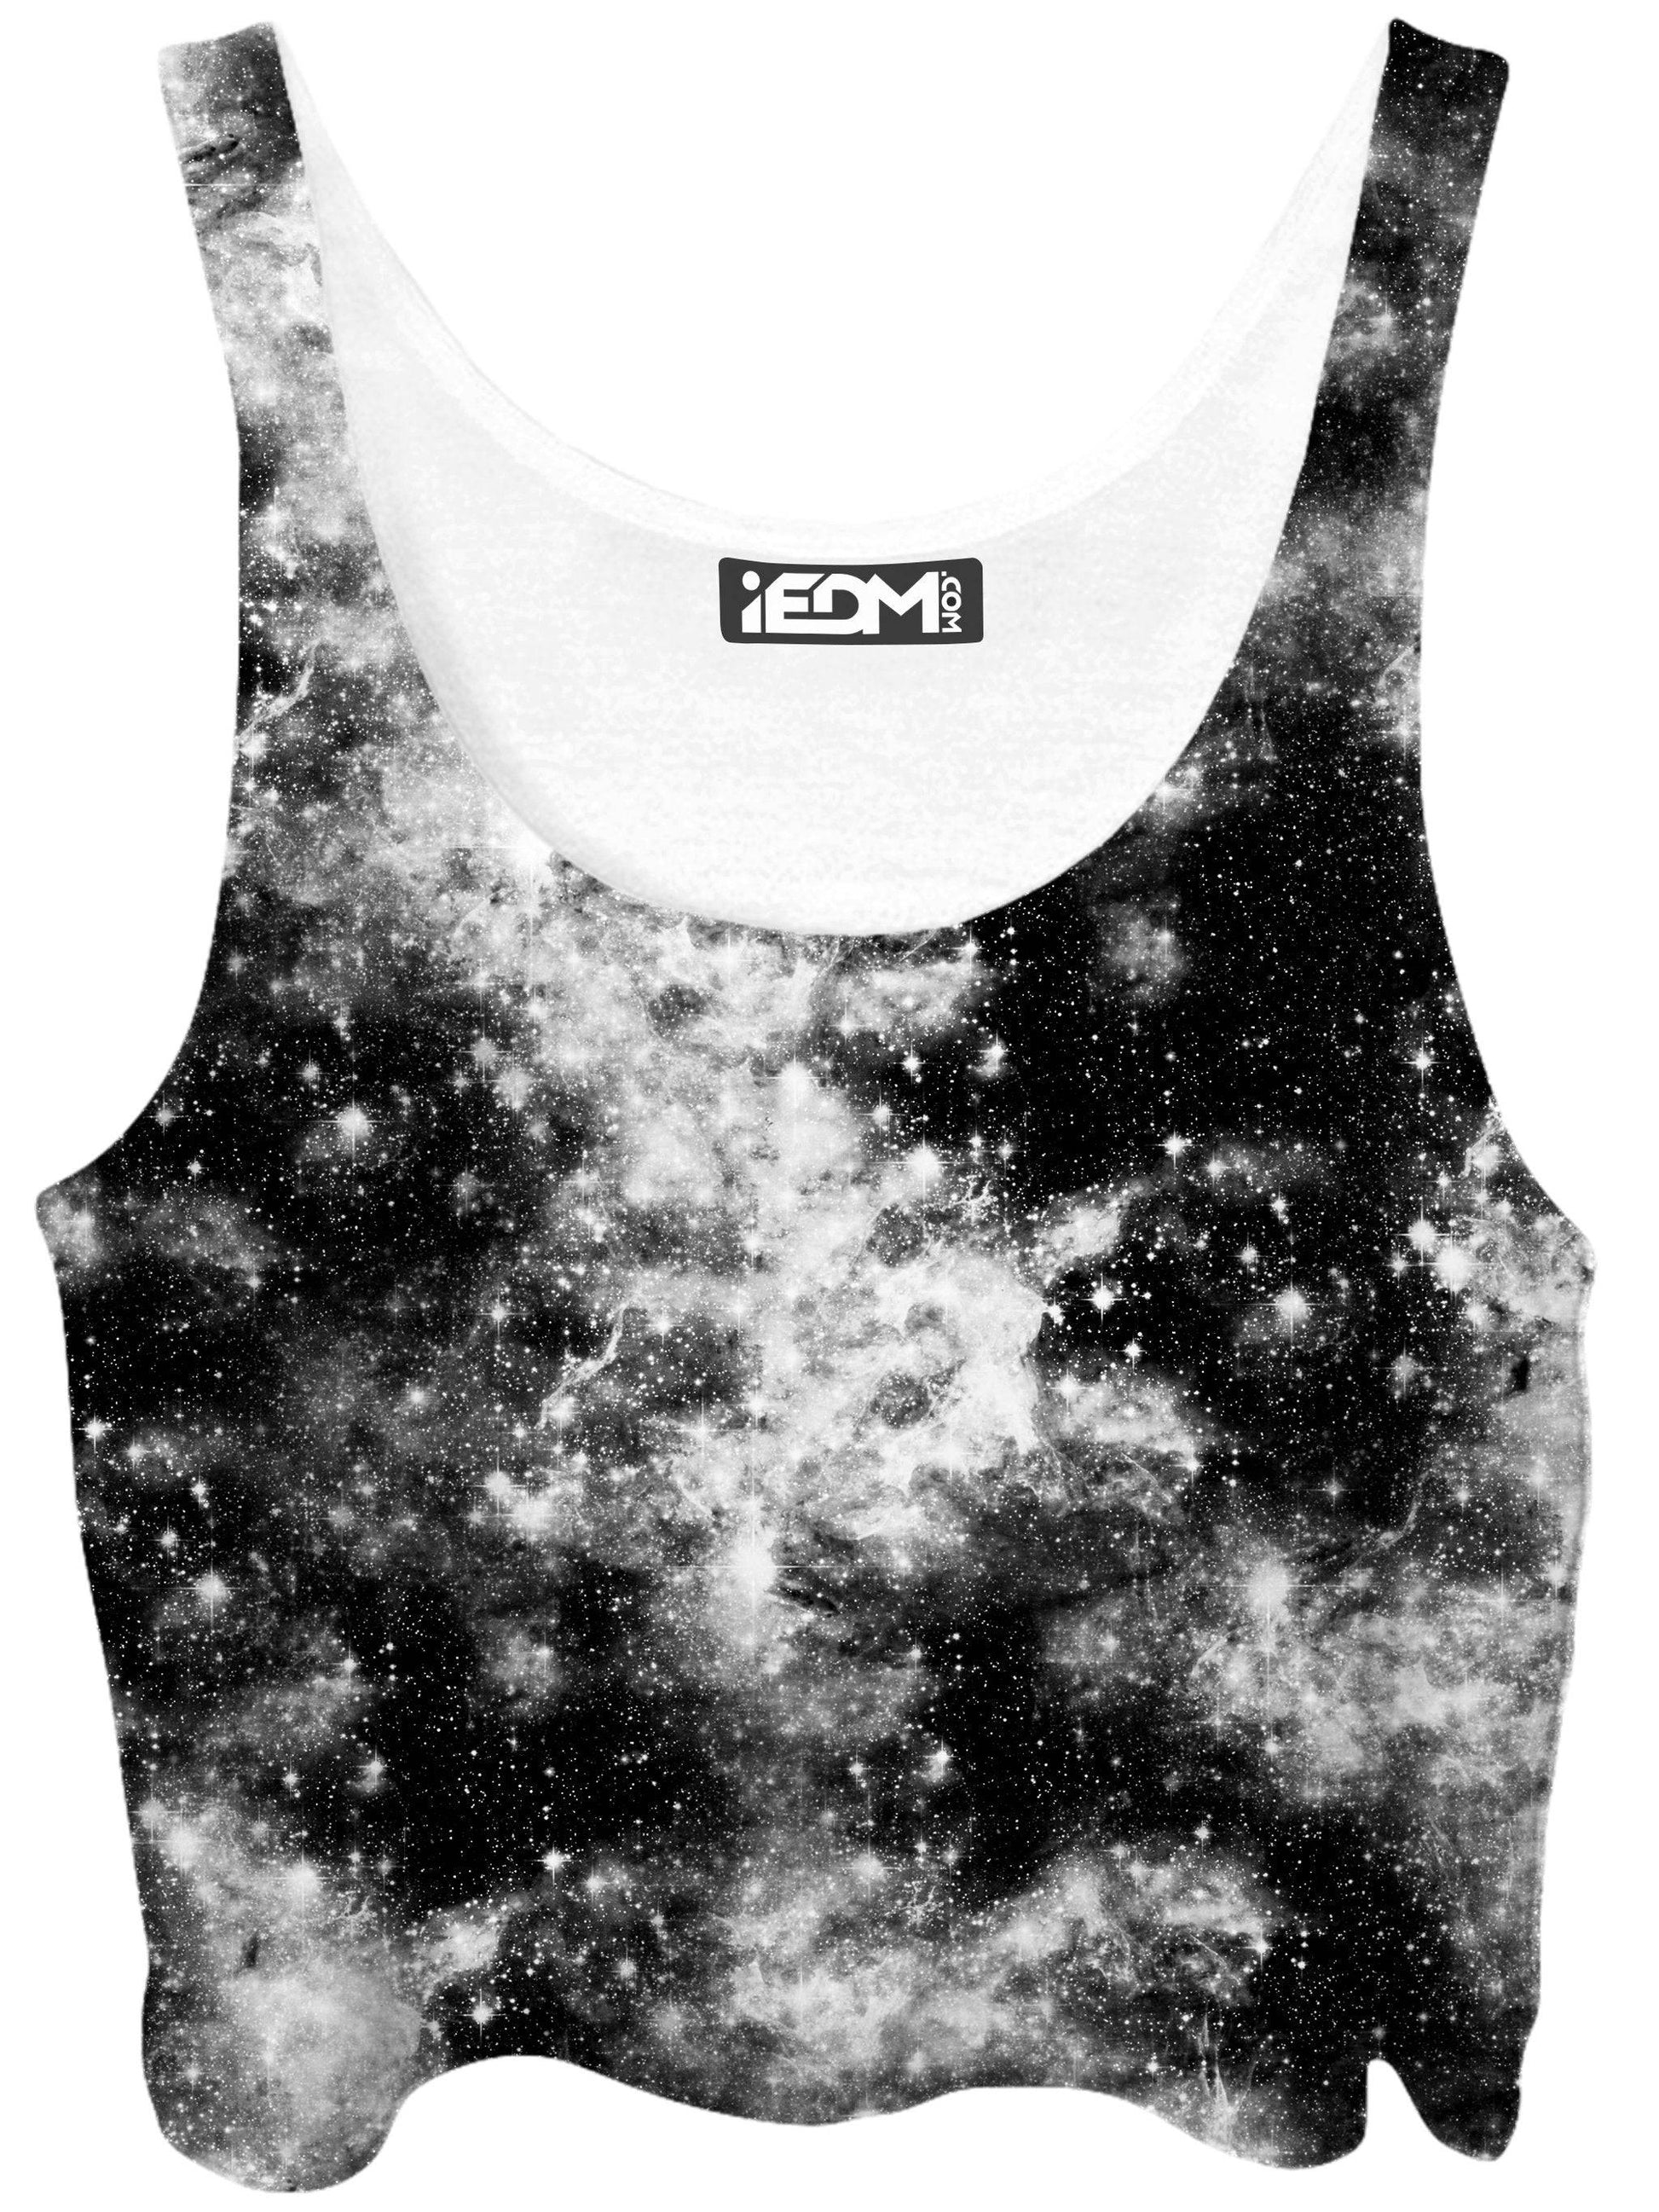 Deep Dark Galaxy Crop Top and Leggings with PM 2.5 Face Mask Combo, Set 4 Lyfe, | iEDM